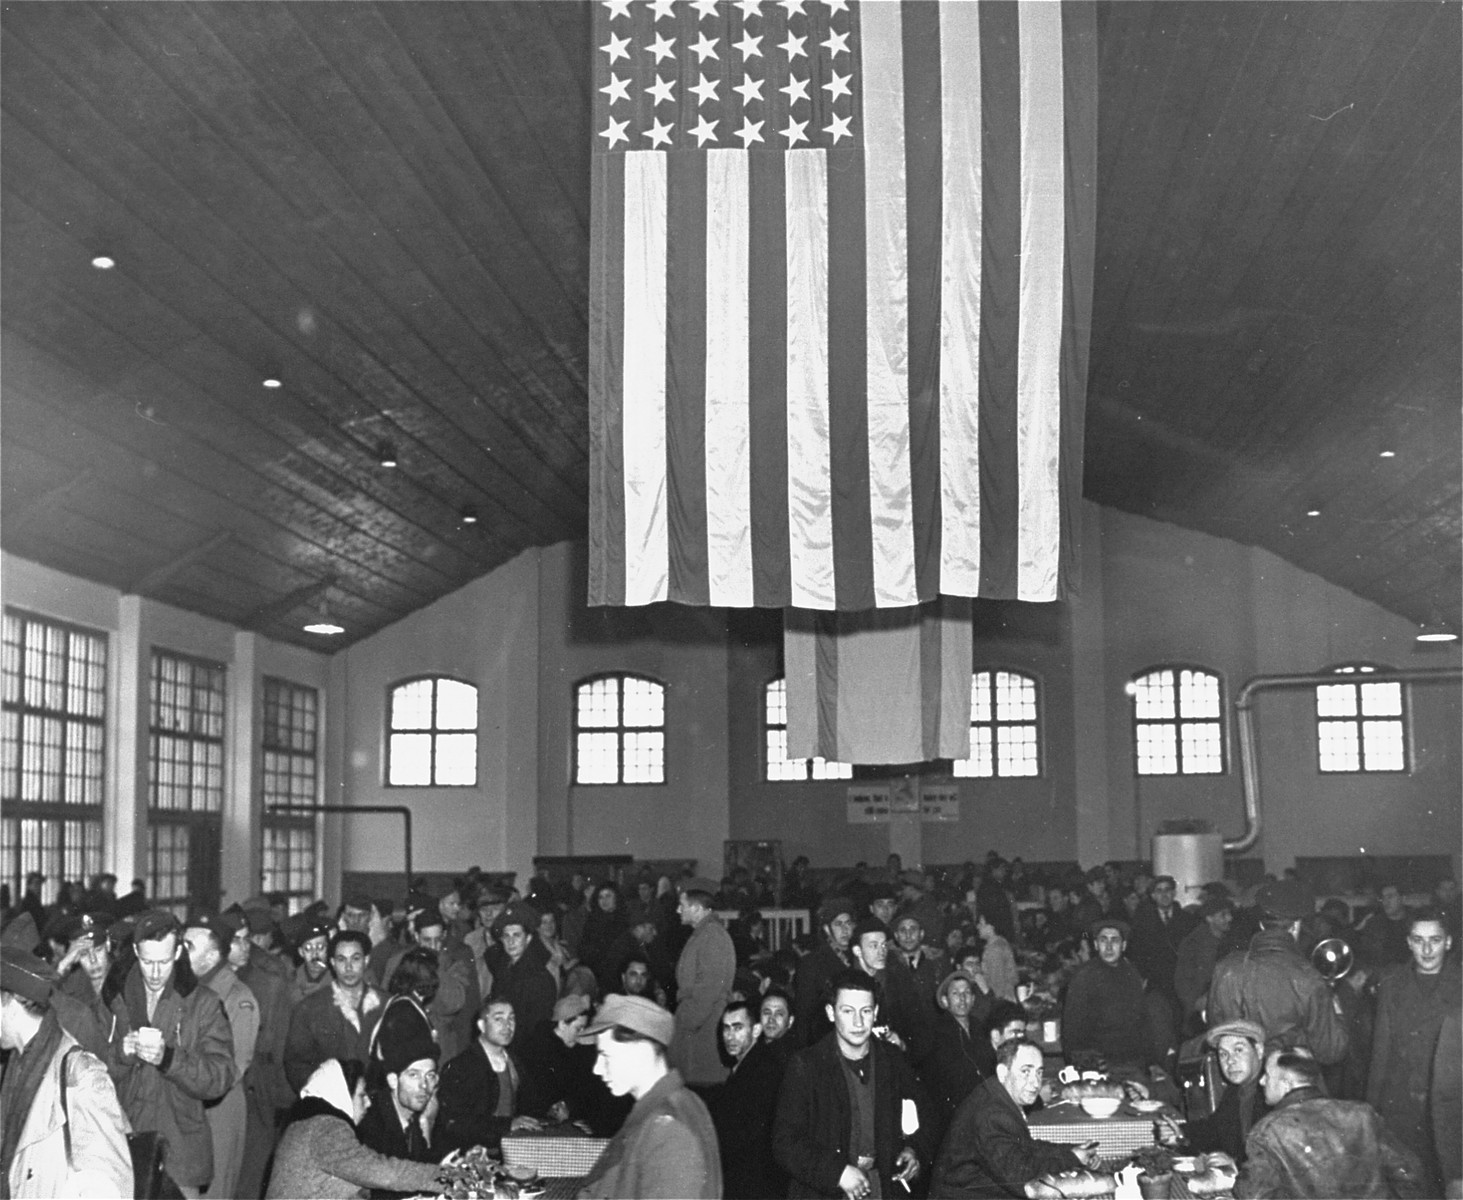 Jewish DPs eat in the main dining hall at the Landsberg displaced persons' camp.